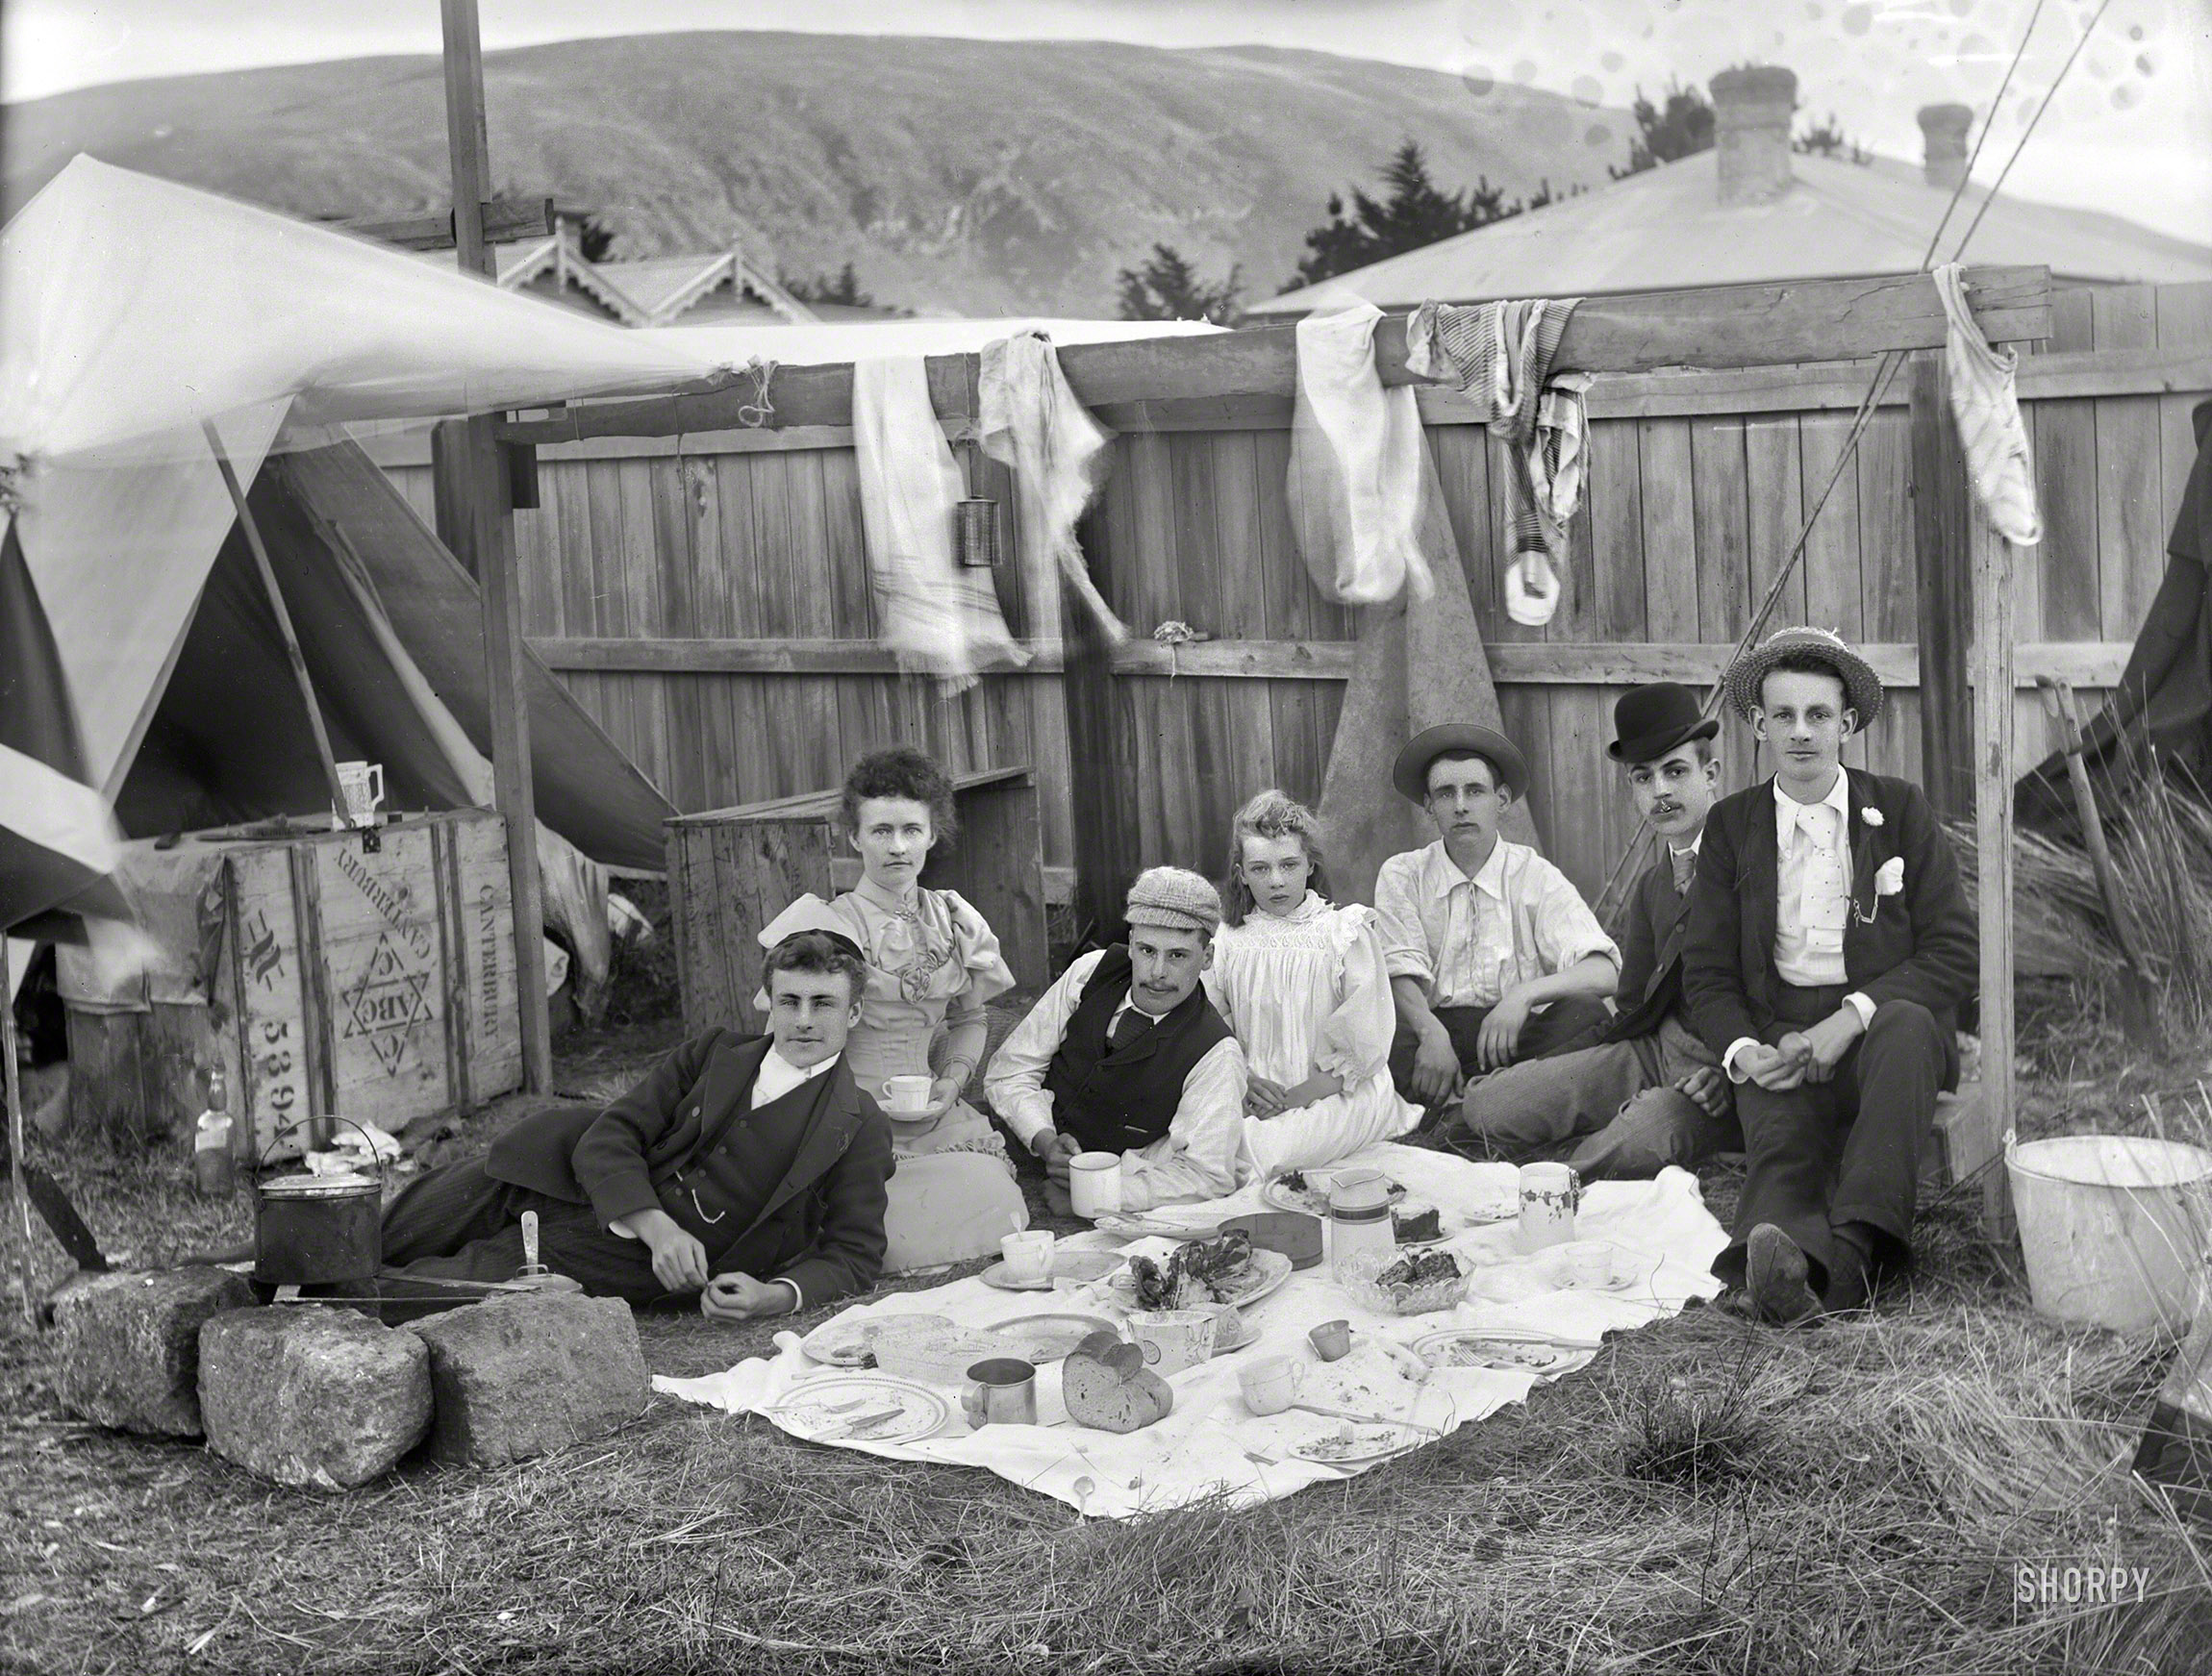 New Zealand circa 1905. "Unidentified group having a picnic outside tent in backyard of house, probably Christchurch district." Are New Zealanders the most picnicking people on the planet? Glass negative by Adam Maclay. View full size.